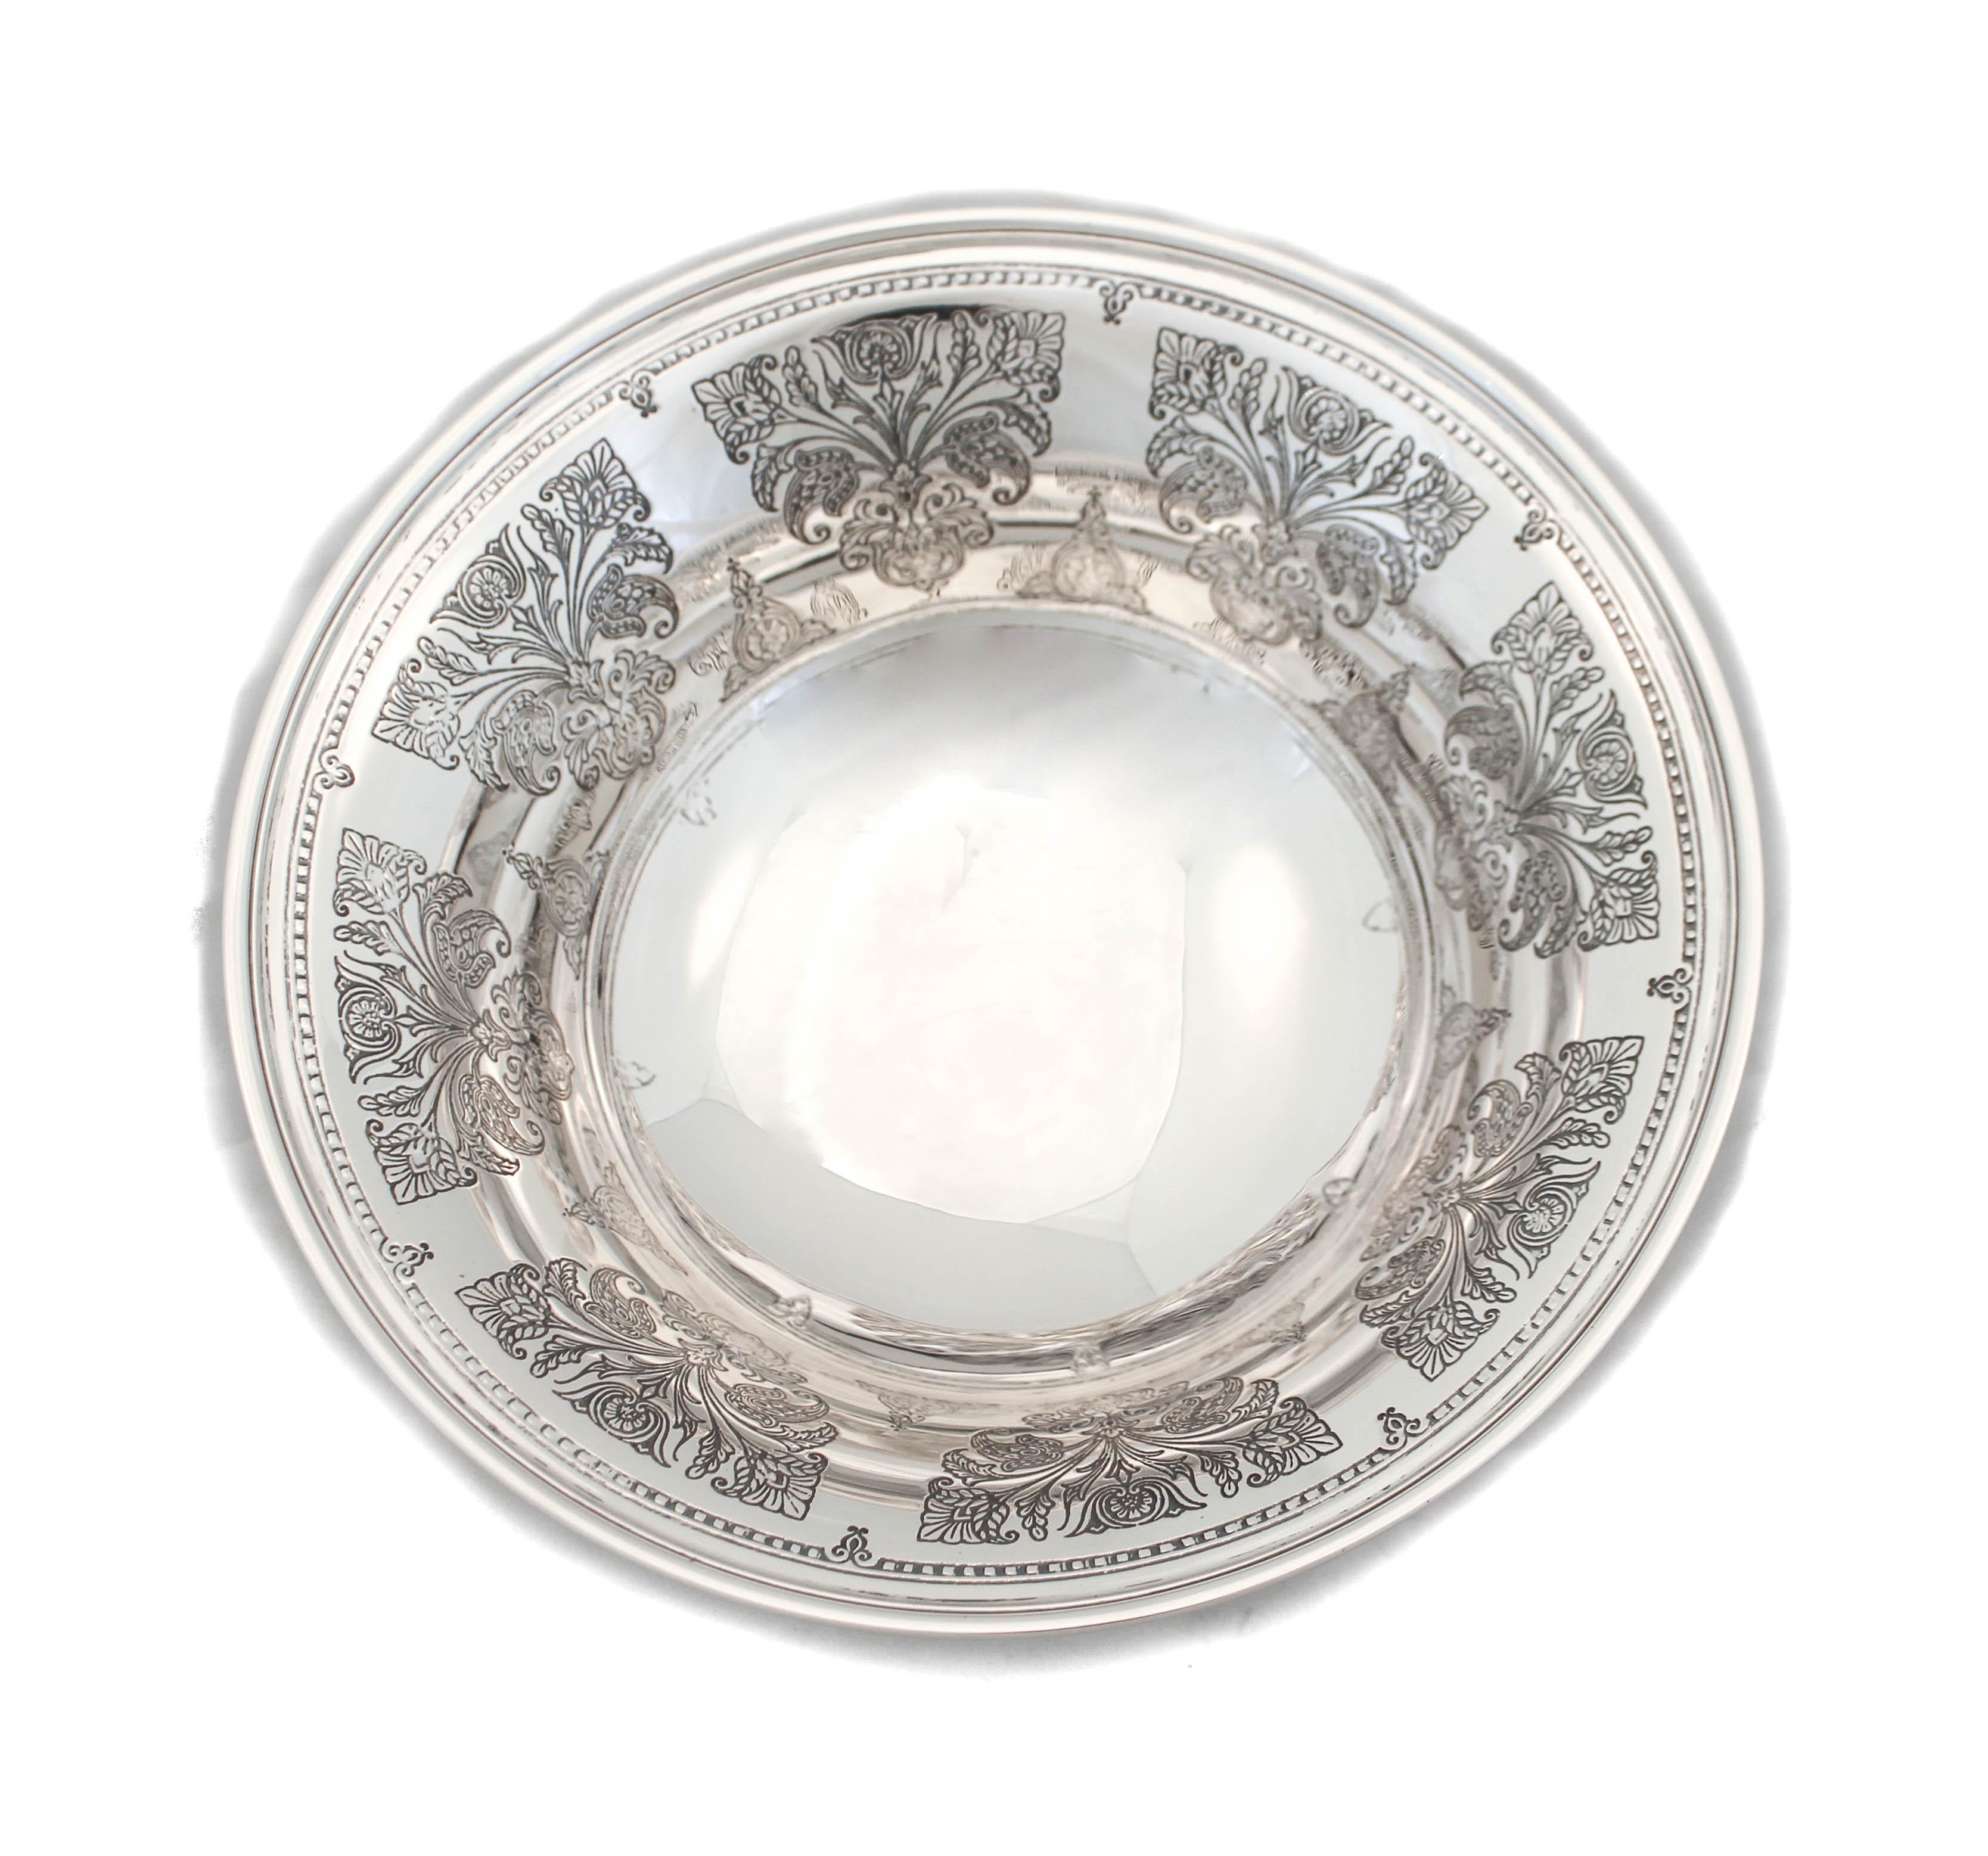 Being offered is a sterling silver bowl by Tiffany & Company. The workmanship is beautiful and the etched design is pristine. Each leaf and curve are crisp and have not faded over time. The bowl stands on a non-weighted pedestal. The shape curves